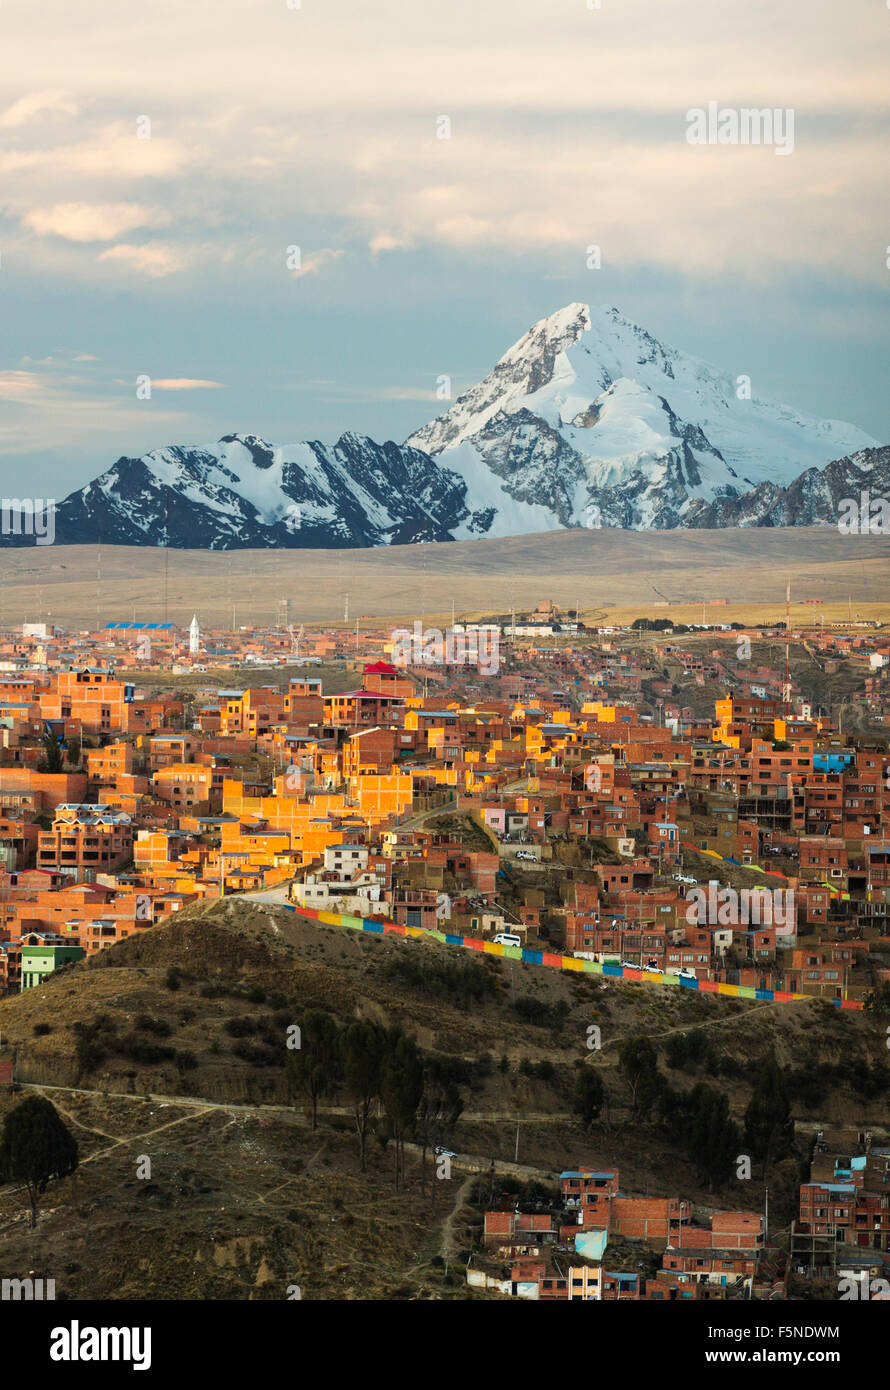 The peak of Huayna Potosi from El Alto above, La Paz, Bolivia. La Paz and El Alto are critically short of water and will probably be the first capital city in the world that will have to be largely abandoned due to lack of water. It relies heavily on glacial meltwater from the surrounding Andean peaks, but as climate change causes the glaciers to melt, it is rapidly running short of water. Stock Photo